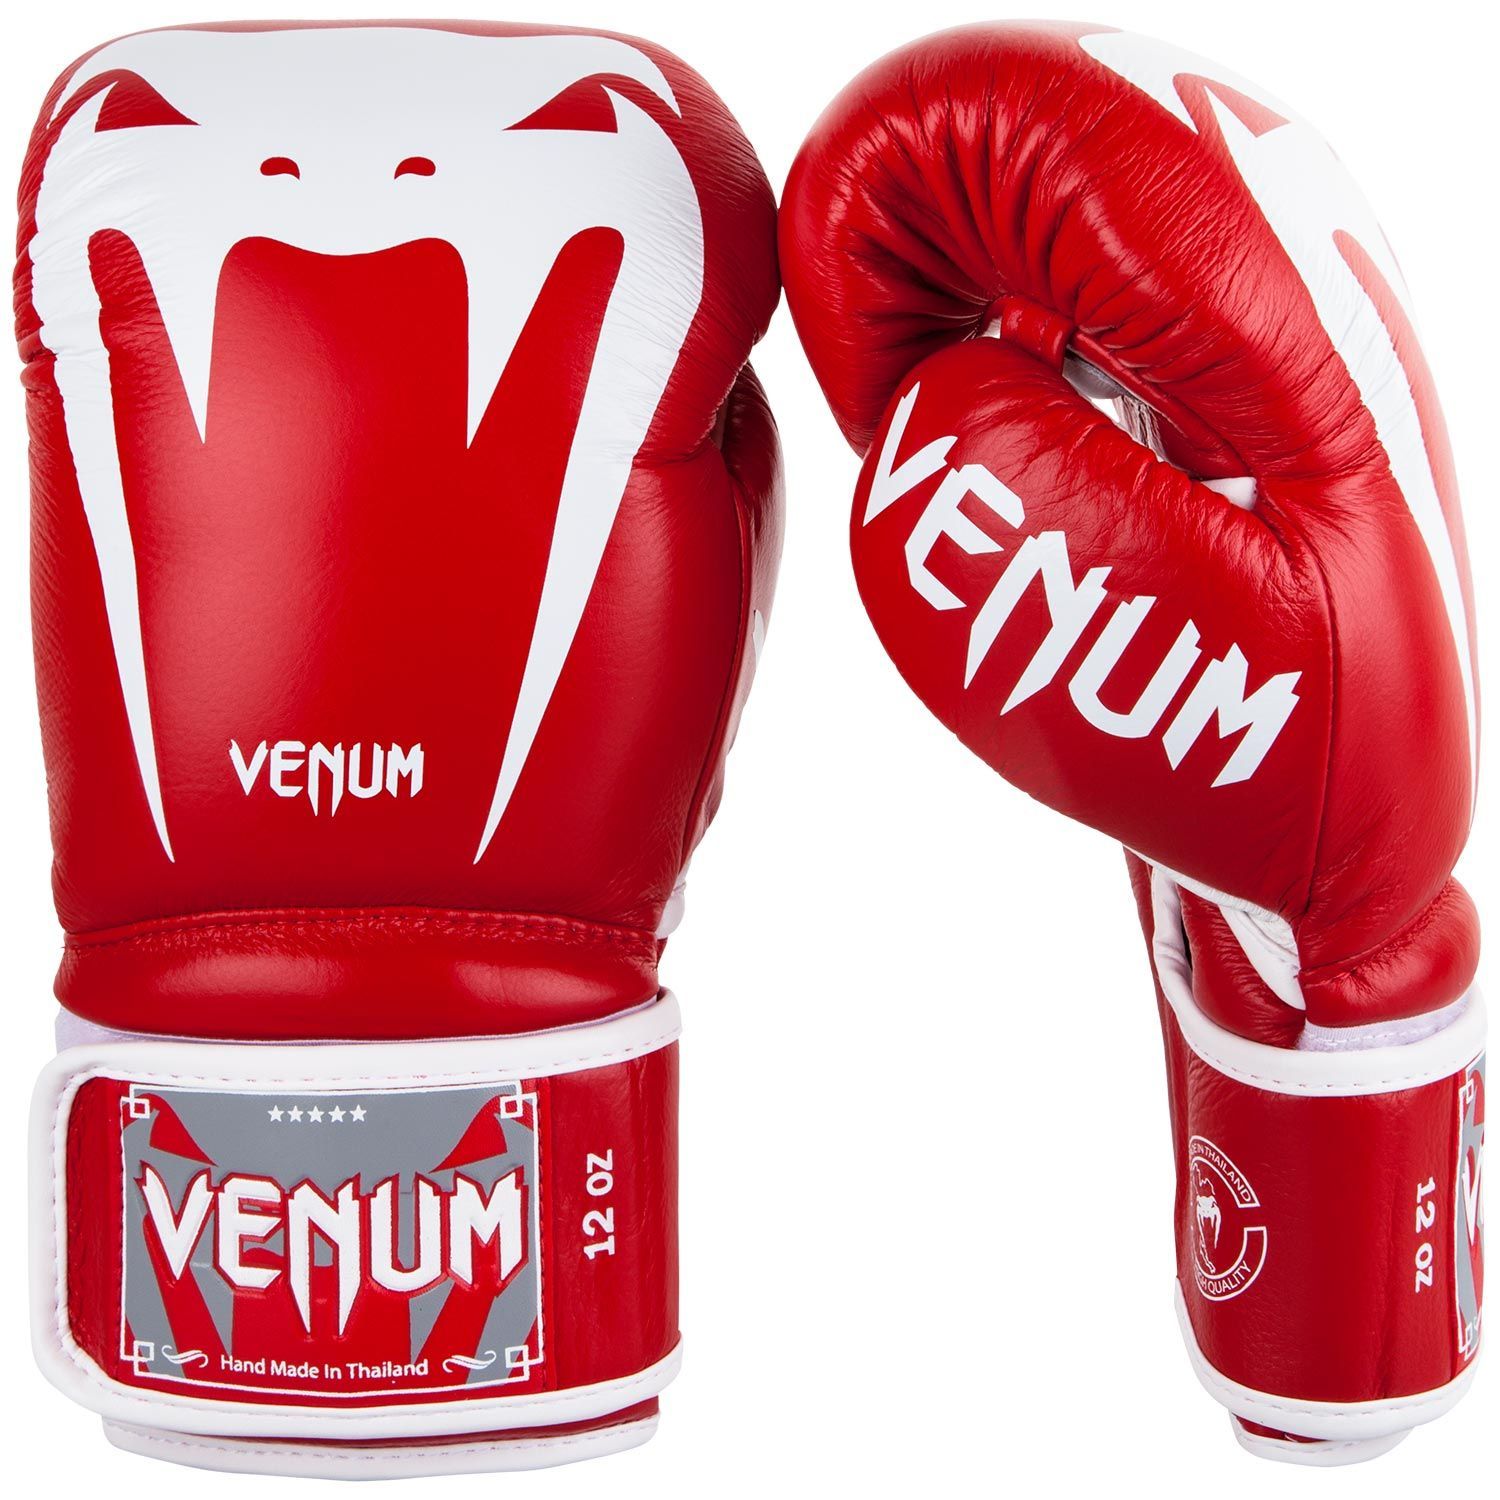 Venum Giant 3.0 Boxing Gloves - Red